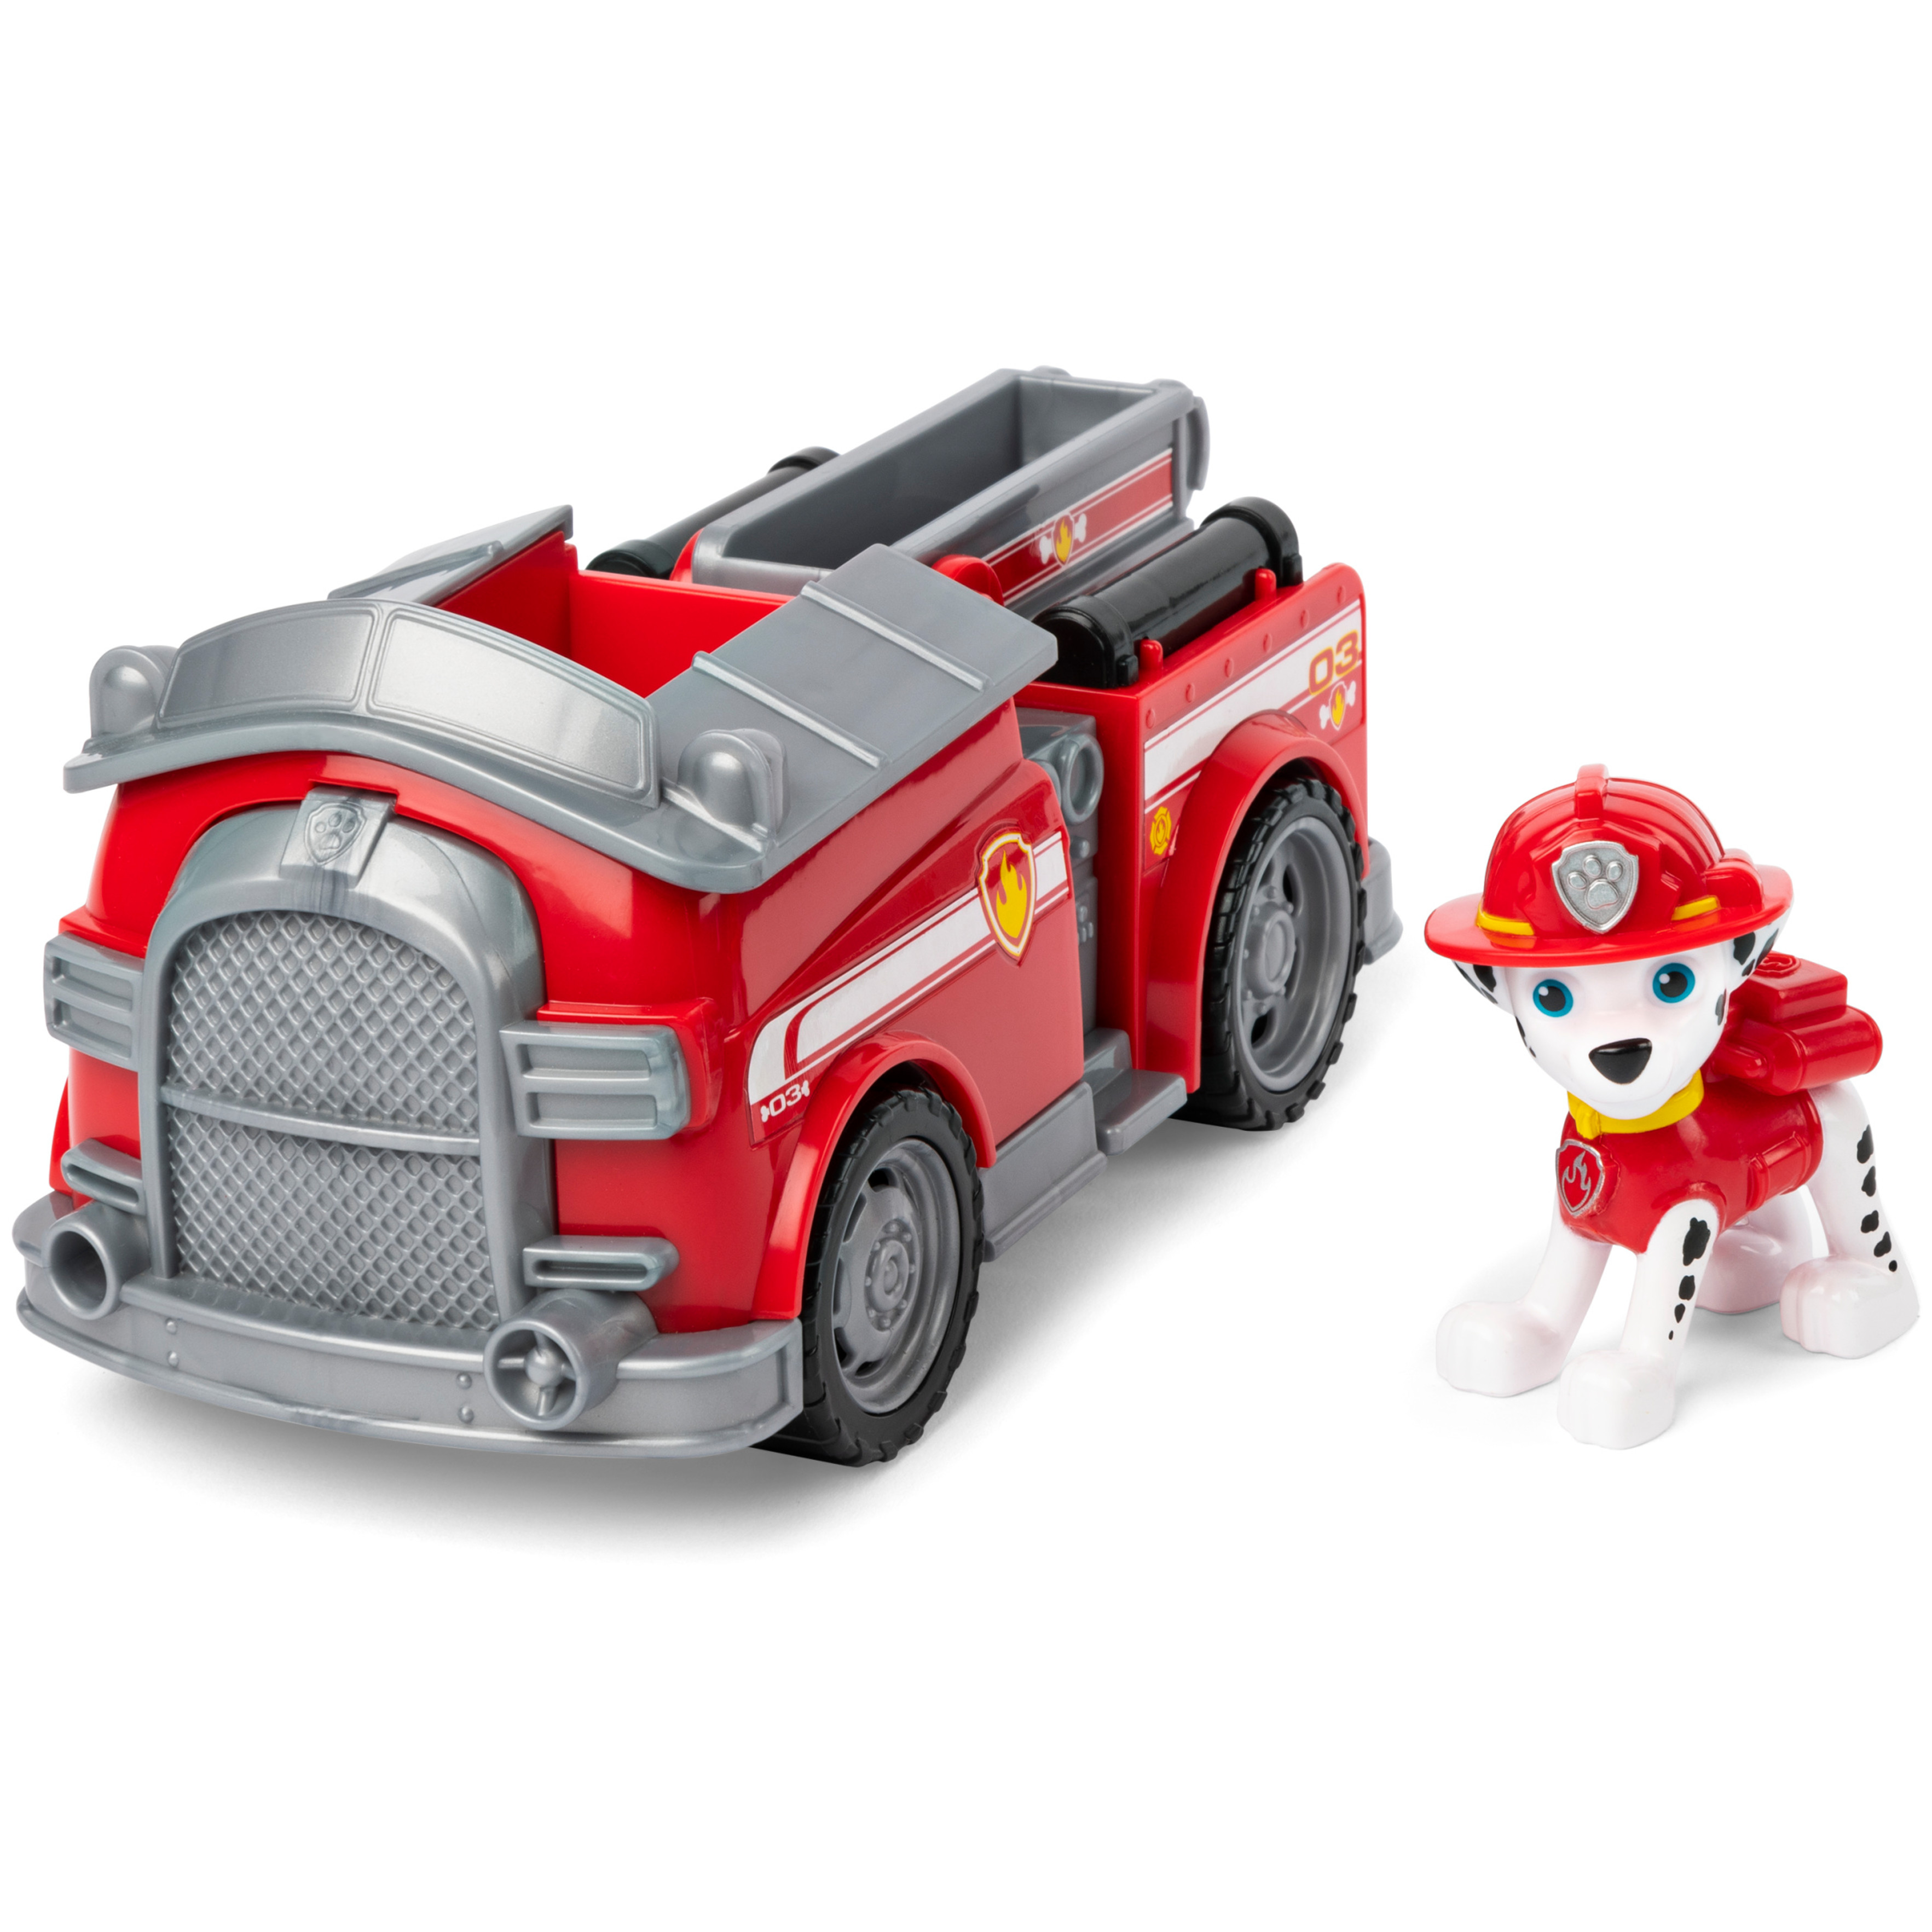 PAW Patrol, Marshall’s Fire Engine Vehicle with Collectible Figure - image 1 of 5